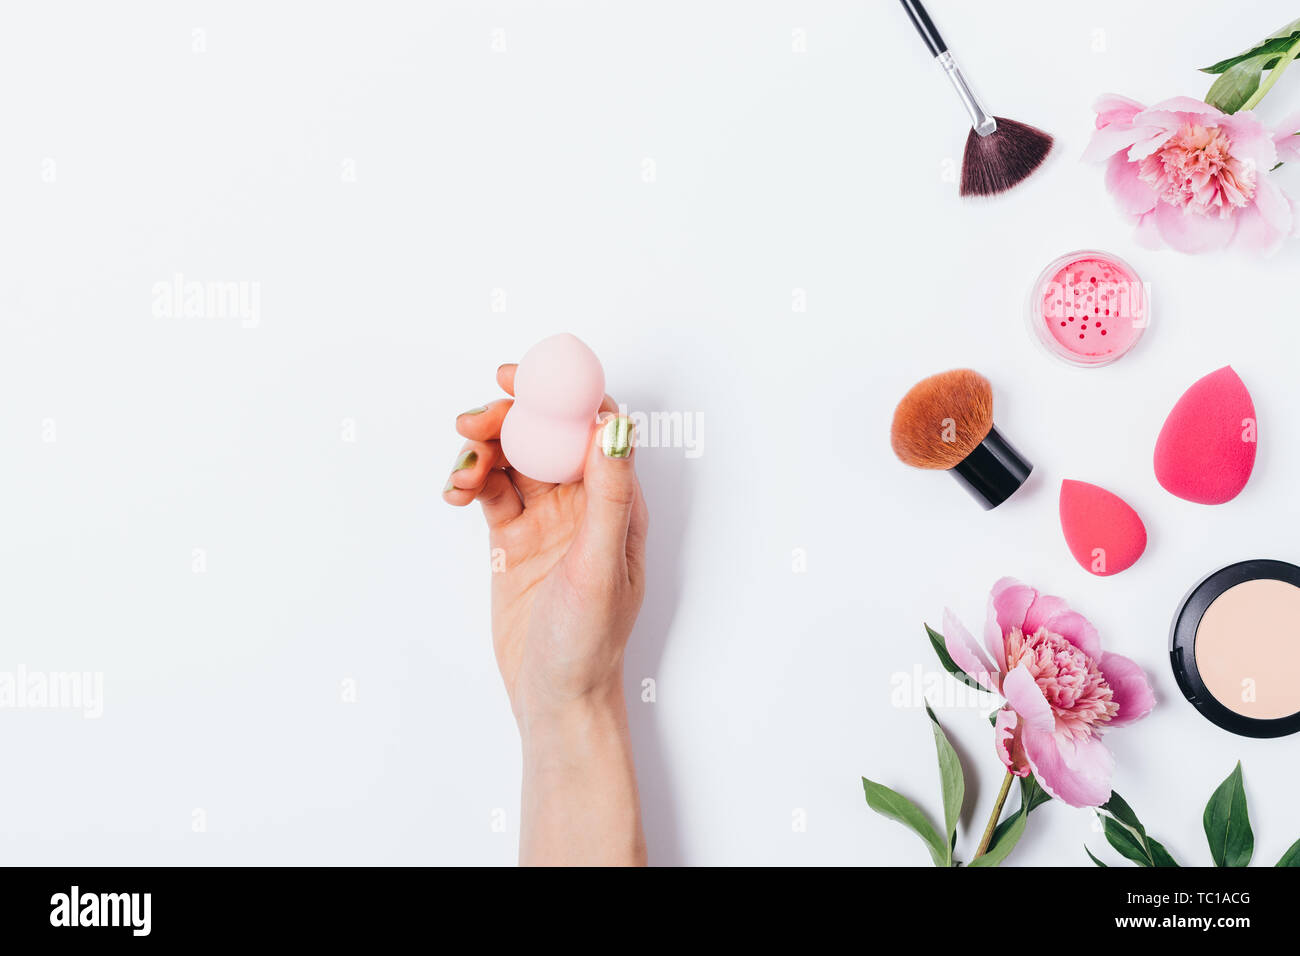 Female hand holding sponge beauty blender next to pink peonies, cosmetic brushes, powder and blush, flat lay on white background. Stock Photo